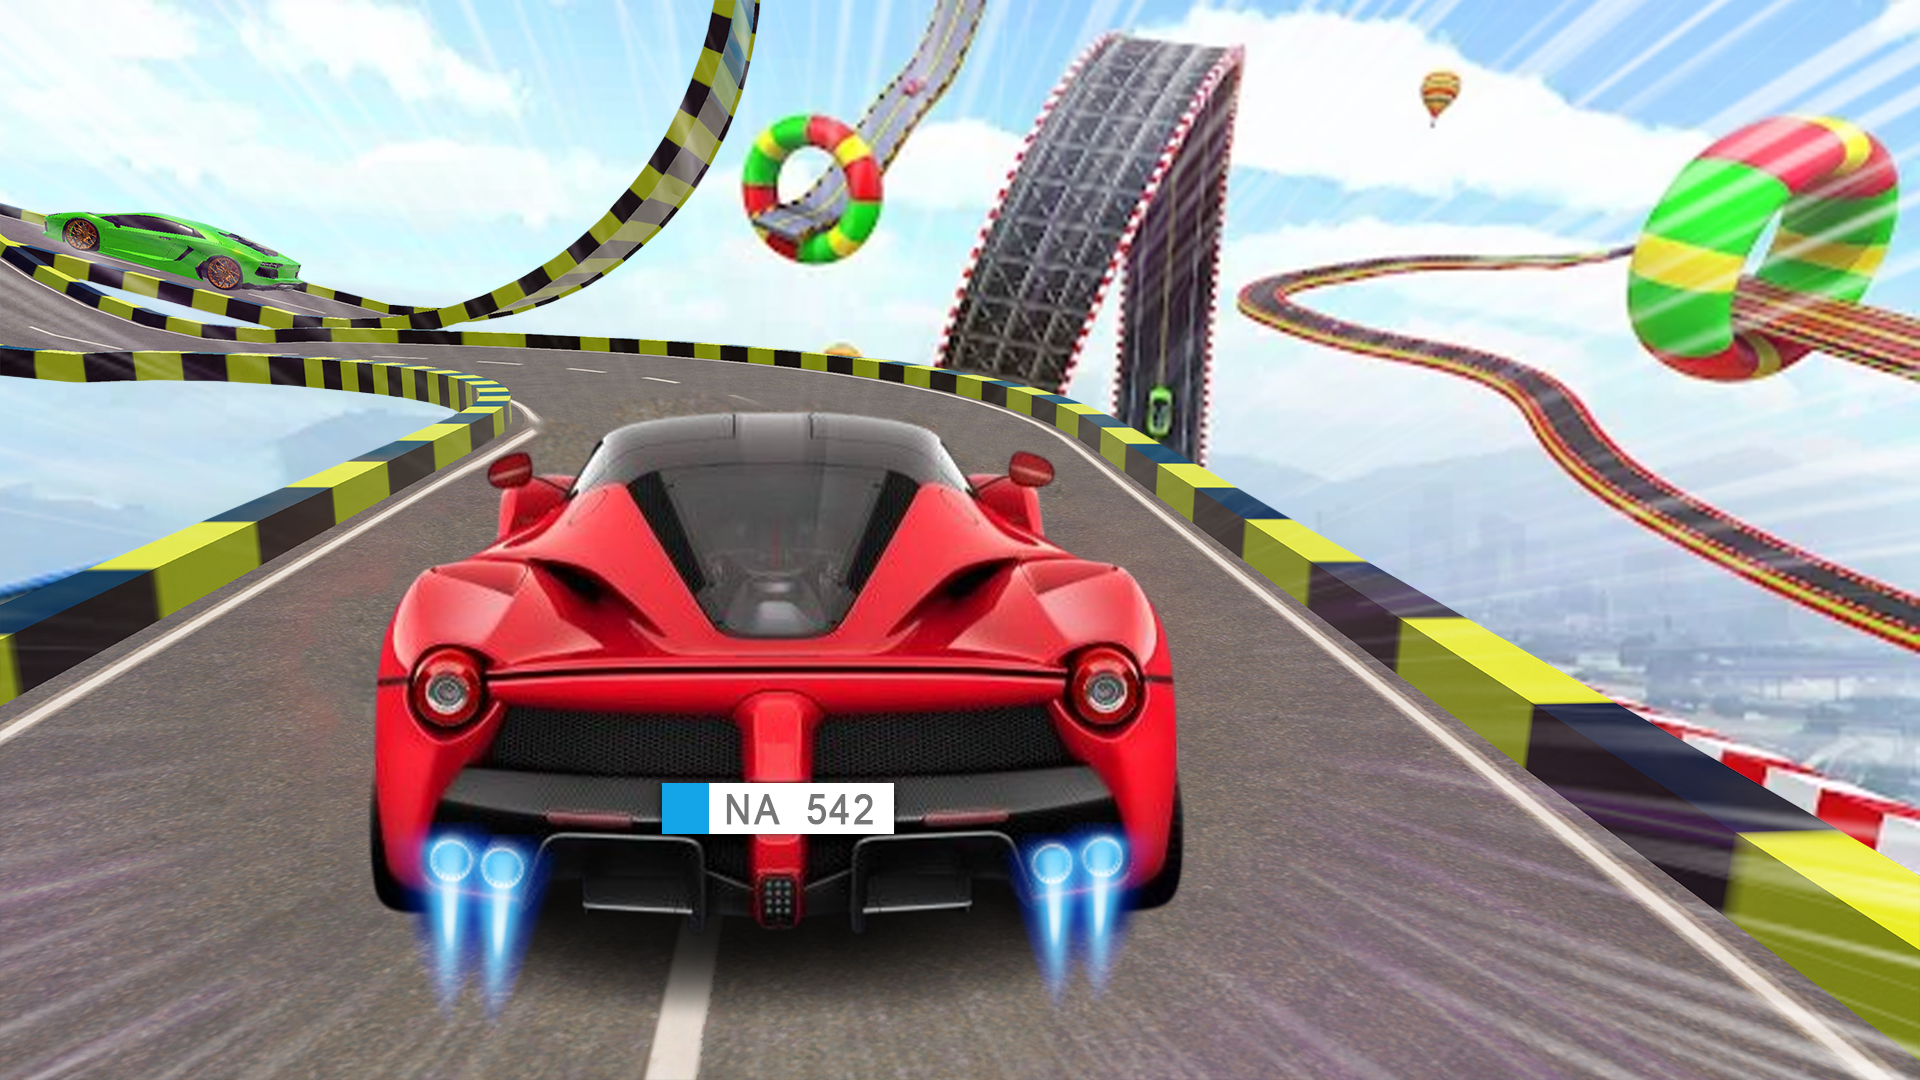 CRAZY CARS free online game on